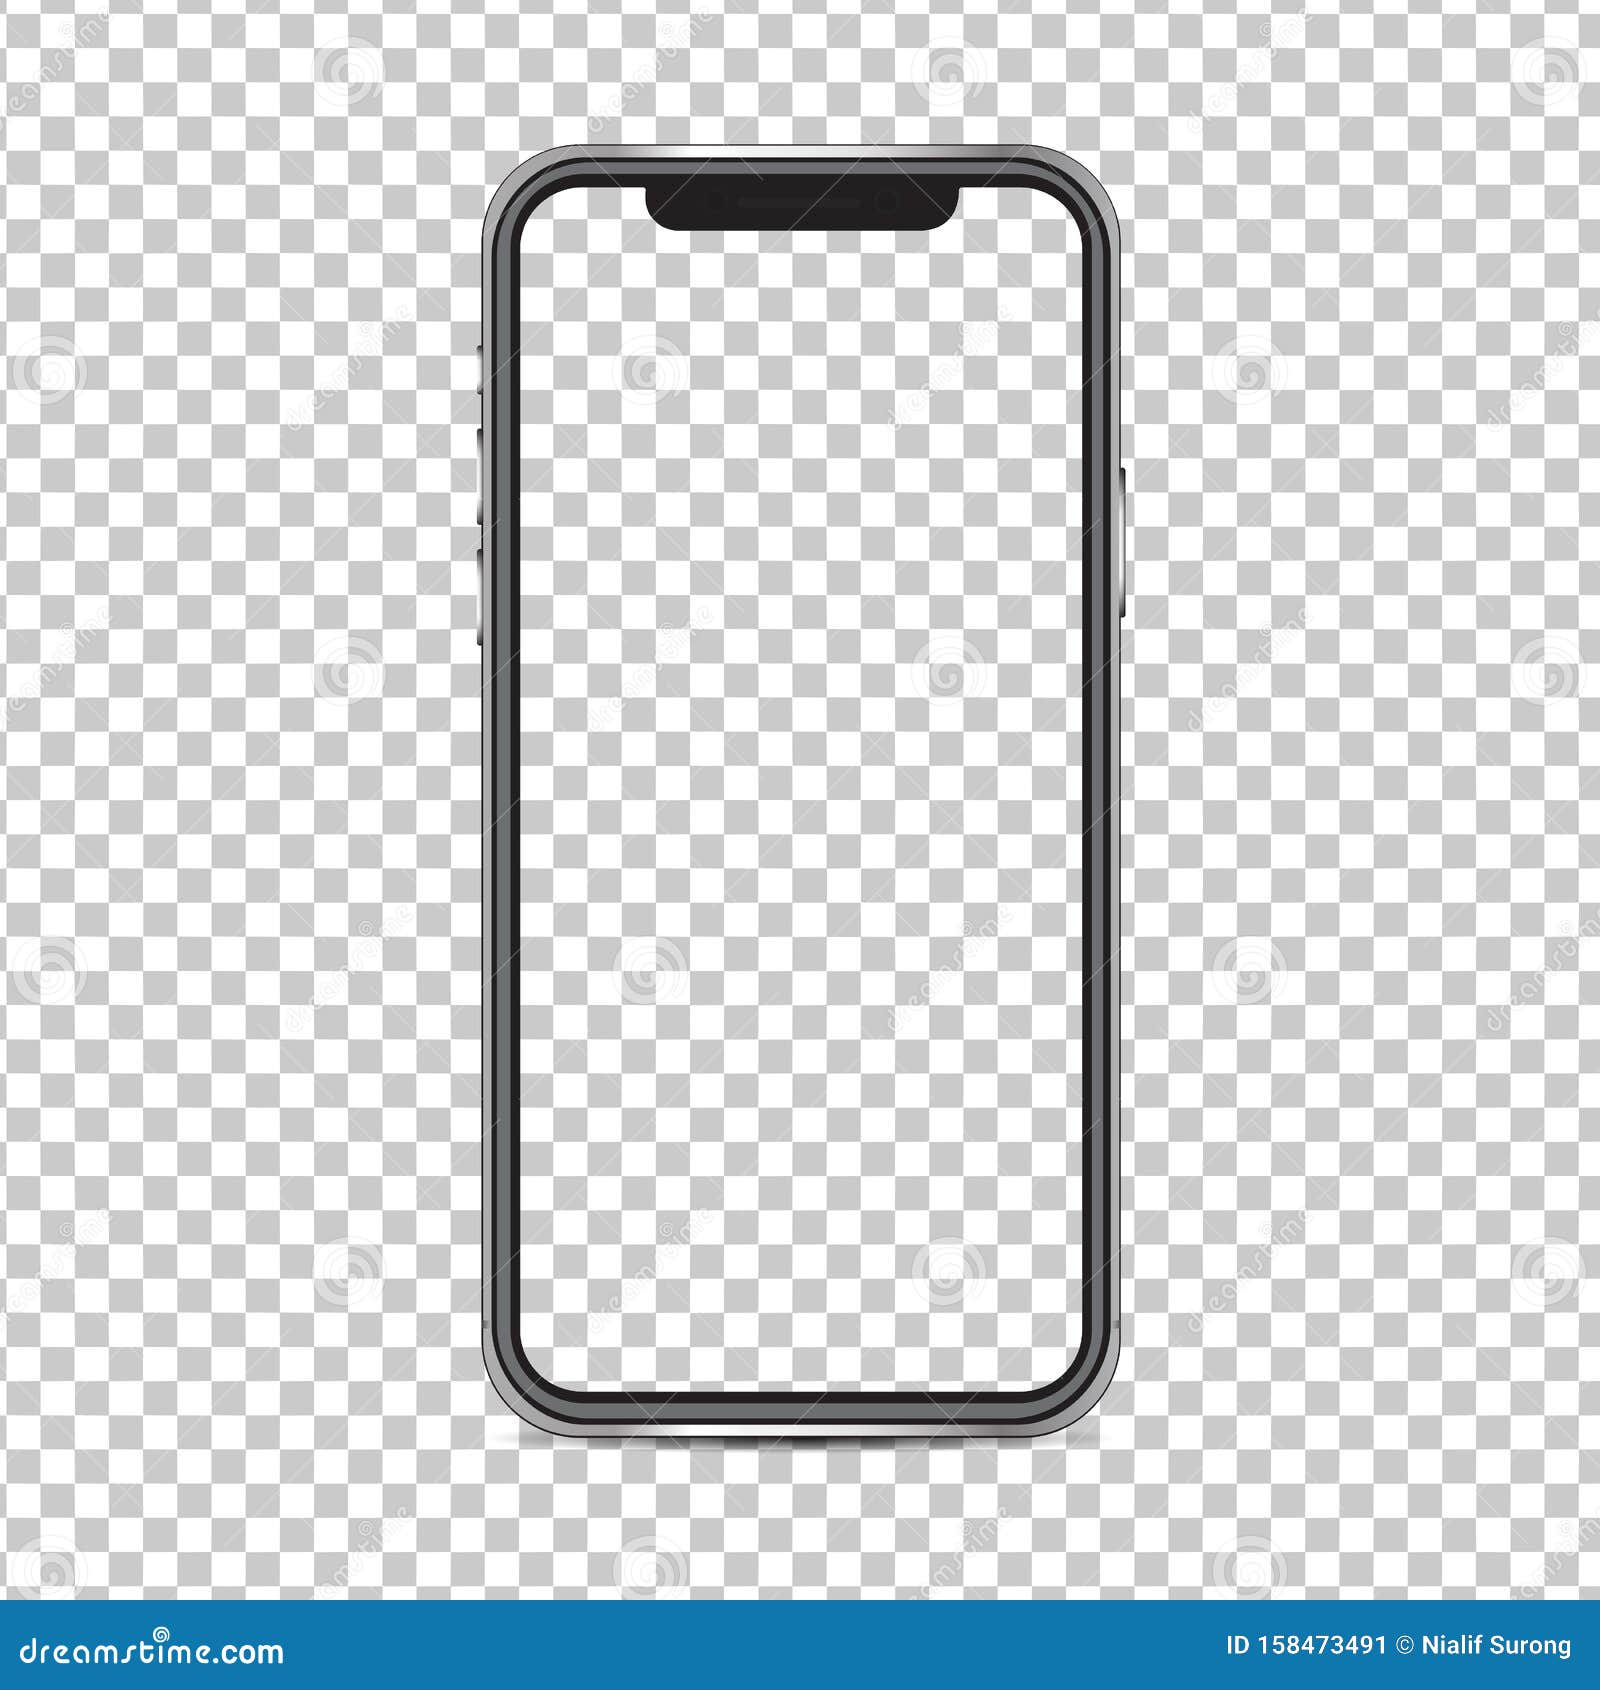 mockup iphone x screen and background have png   on background.